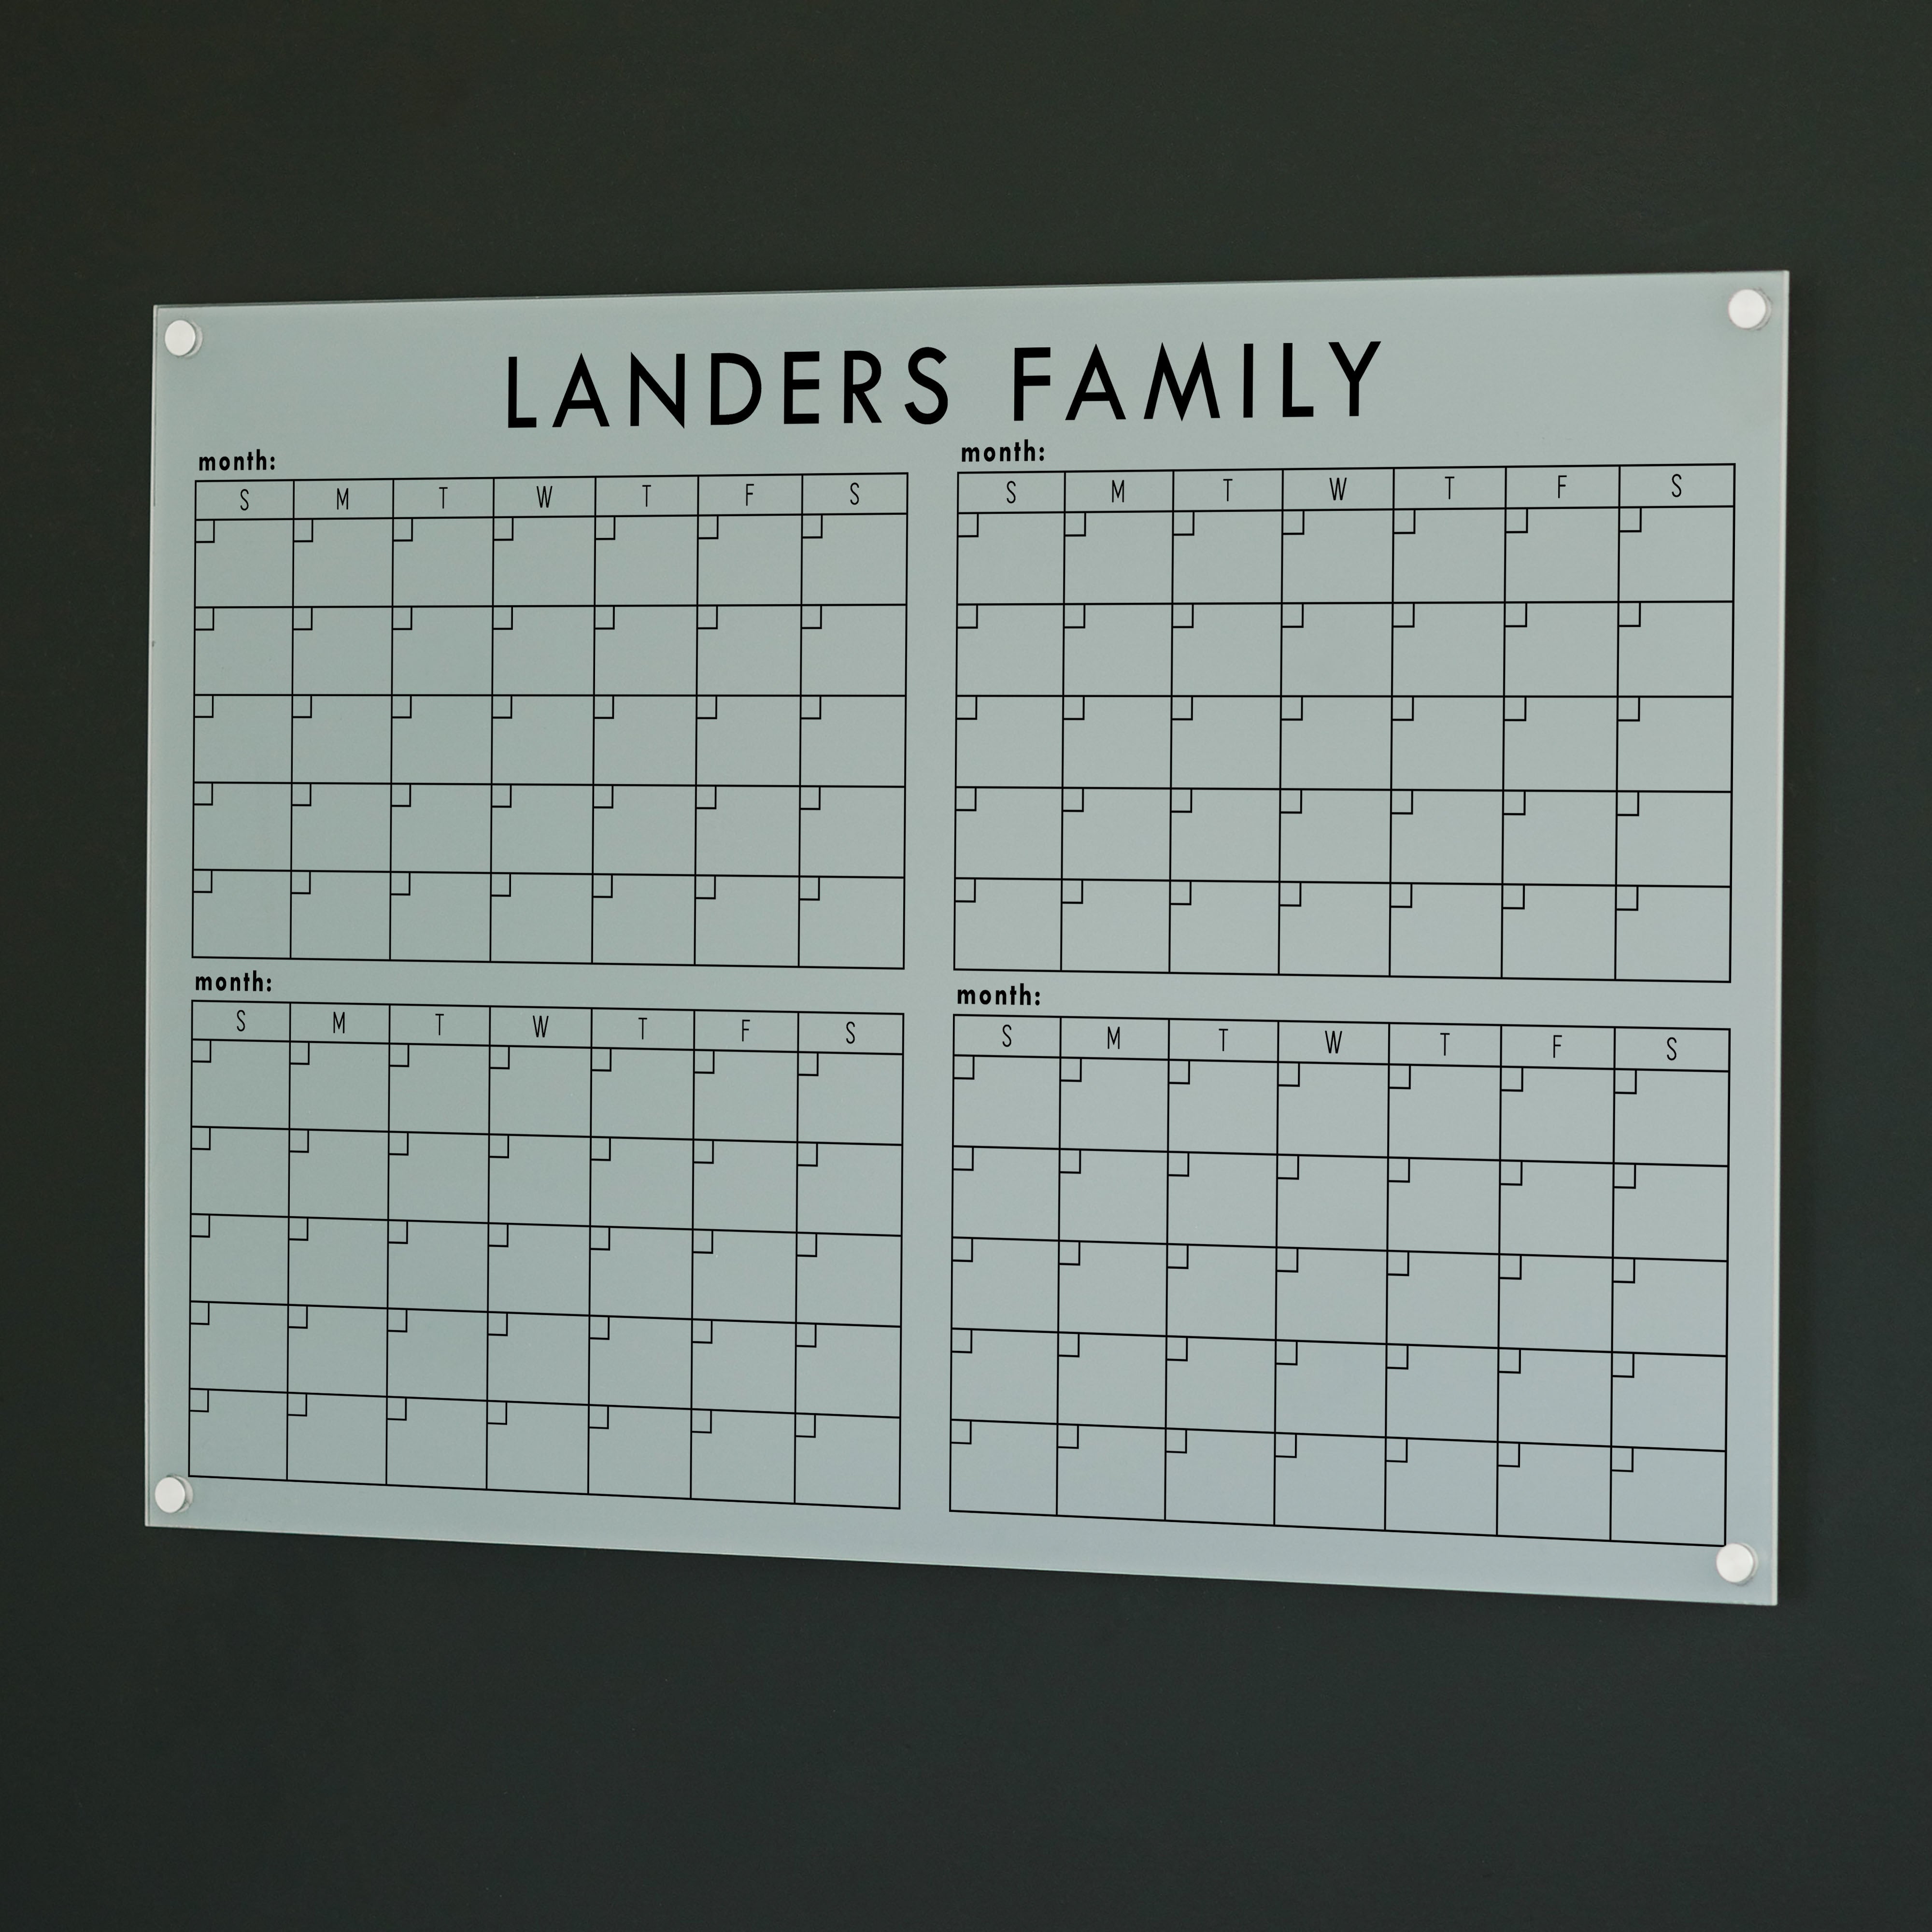 A dry-erase four month calendar made of acrylic hanging on the wall